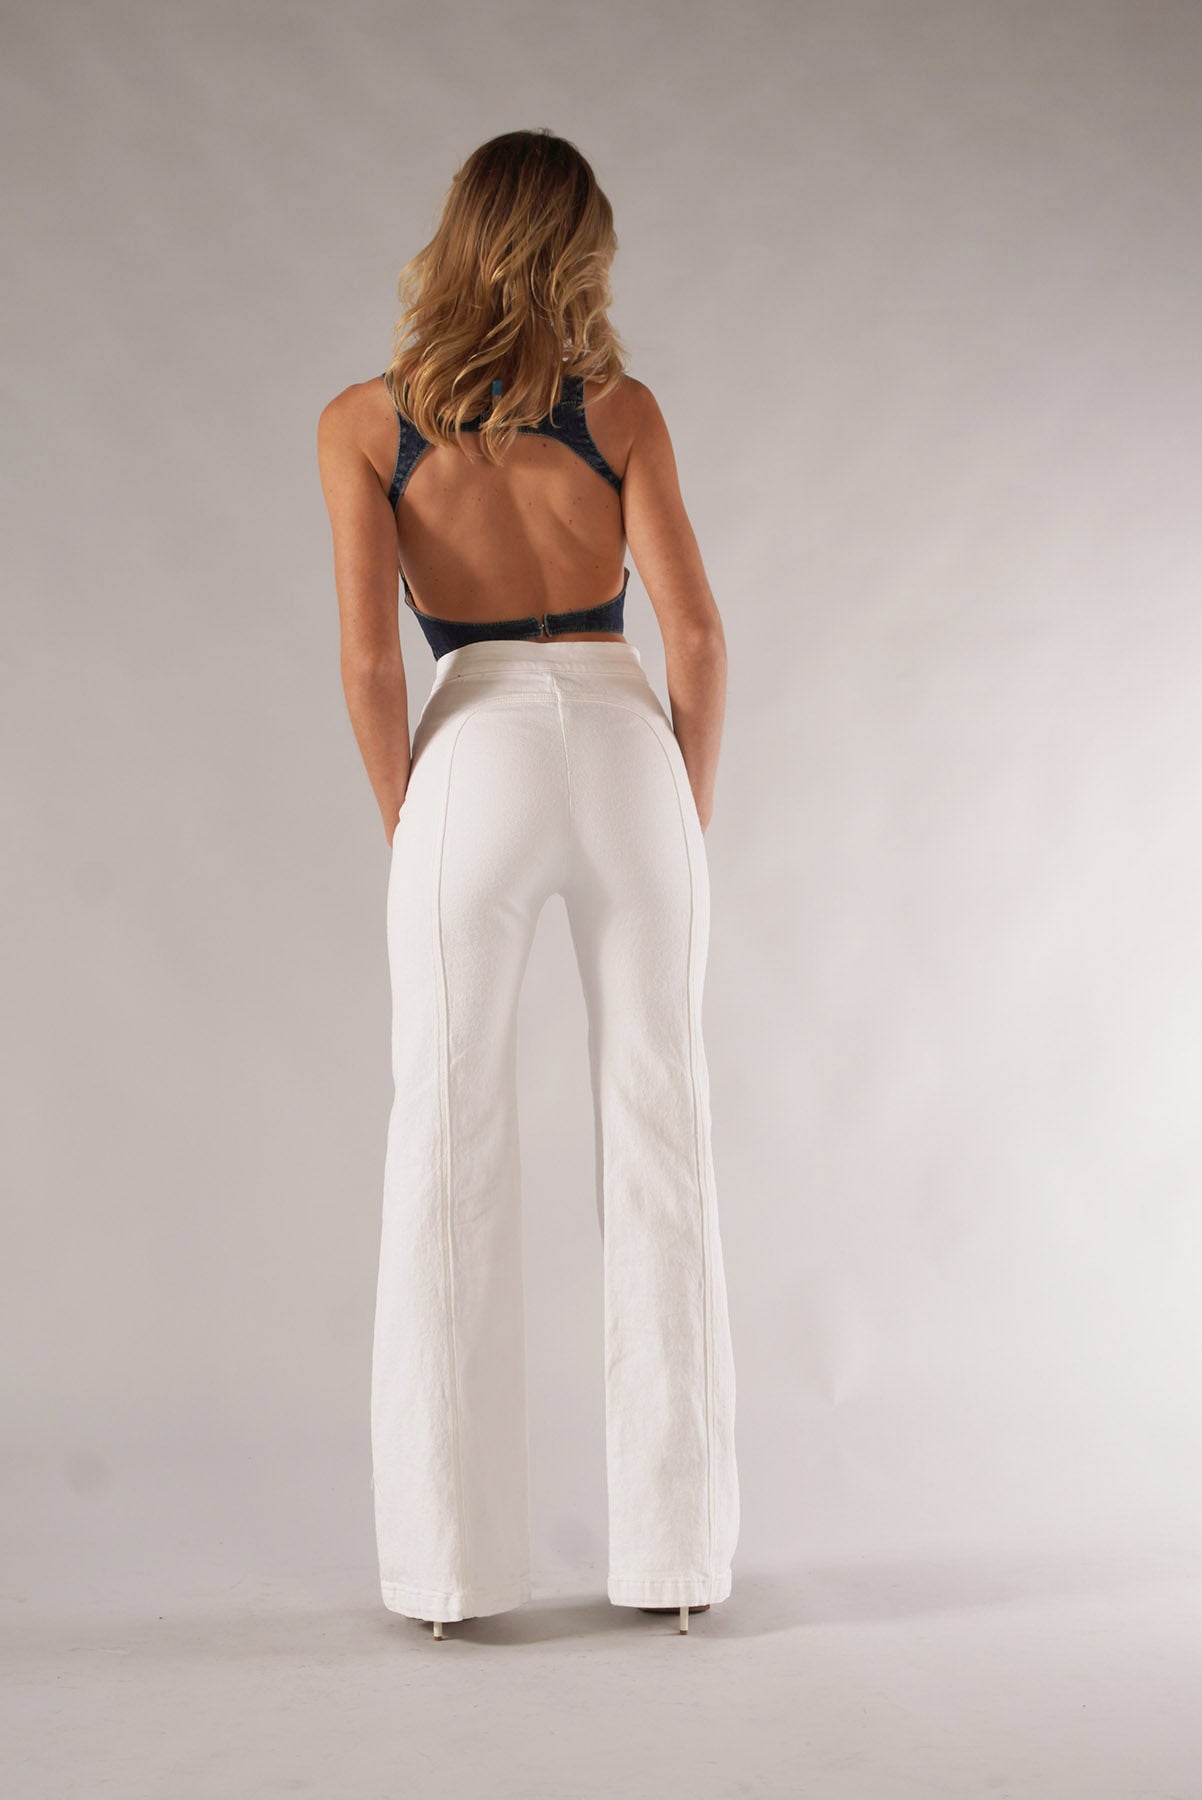 Rollergirl Flares / Optical White